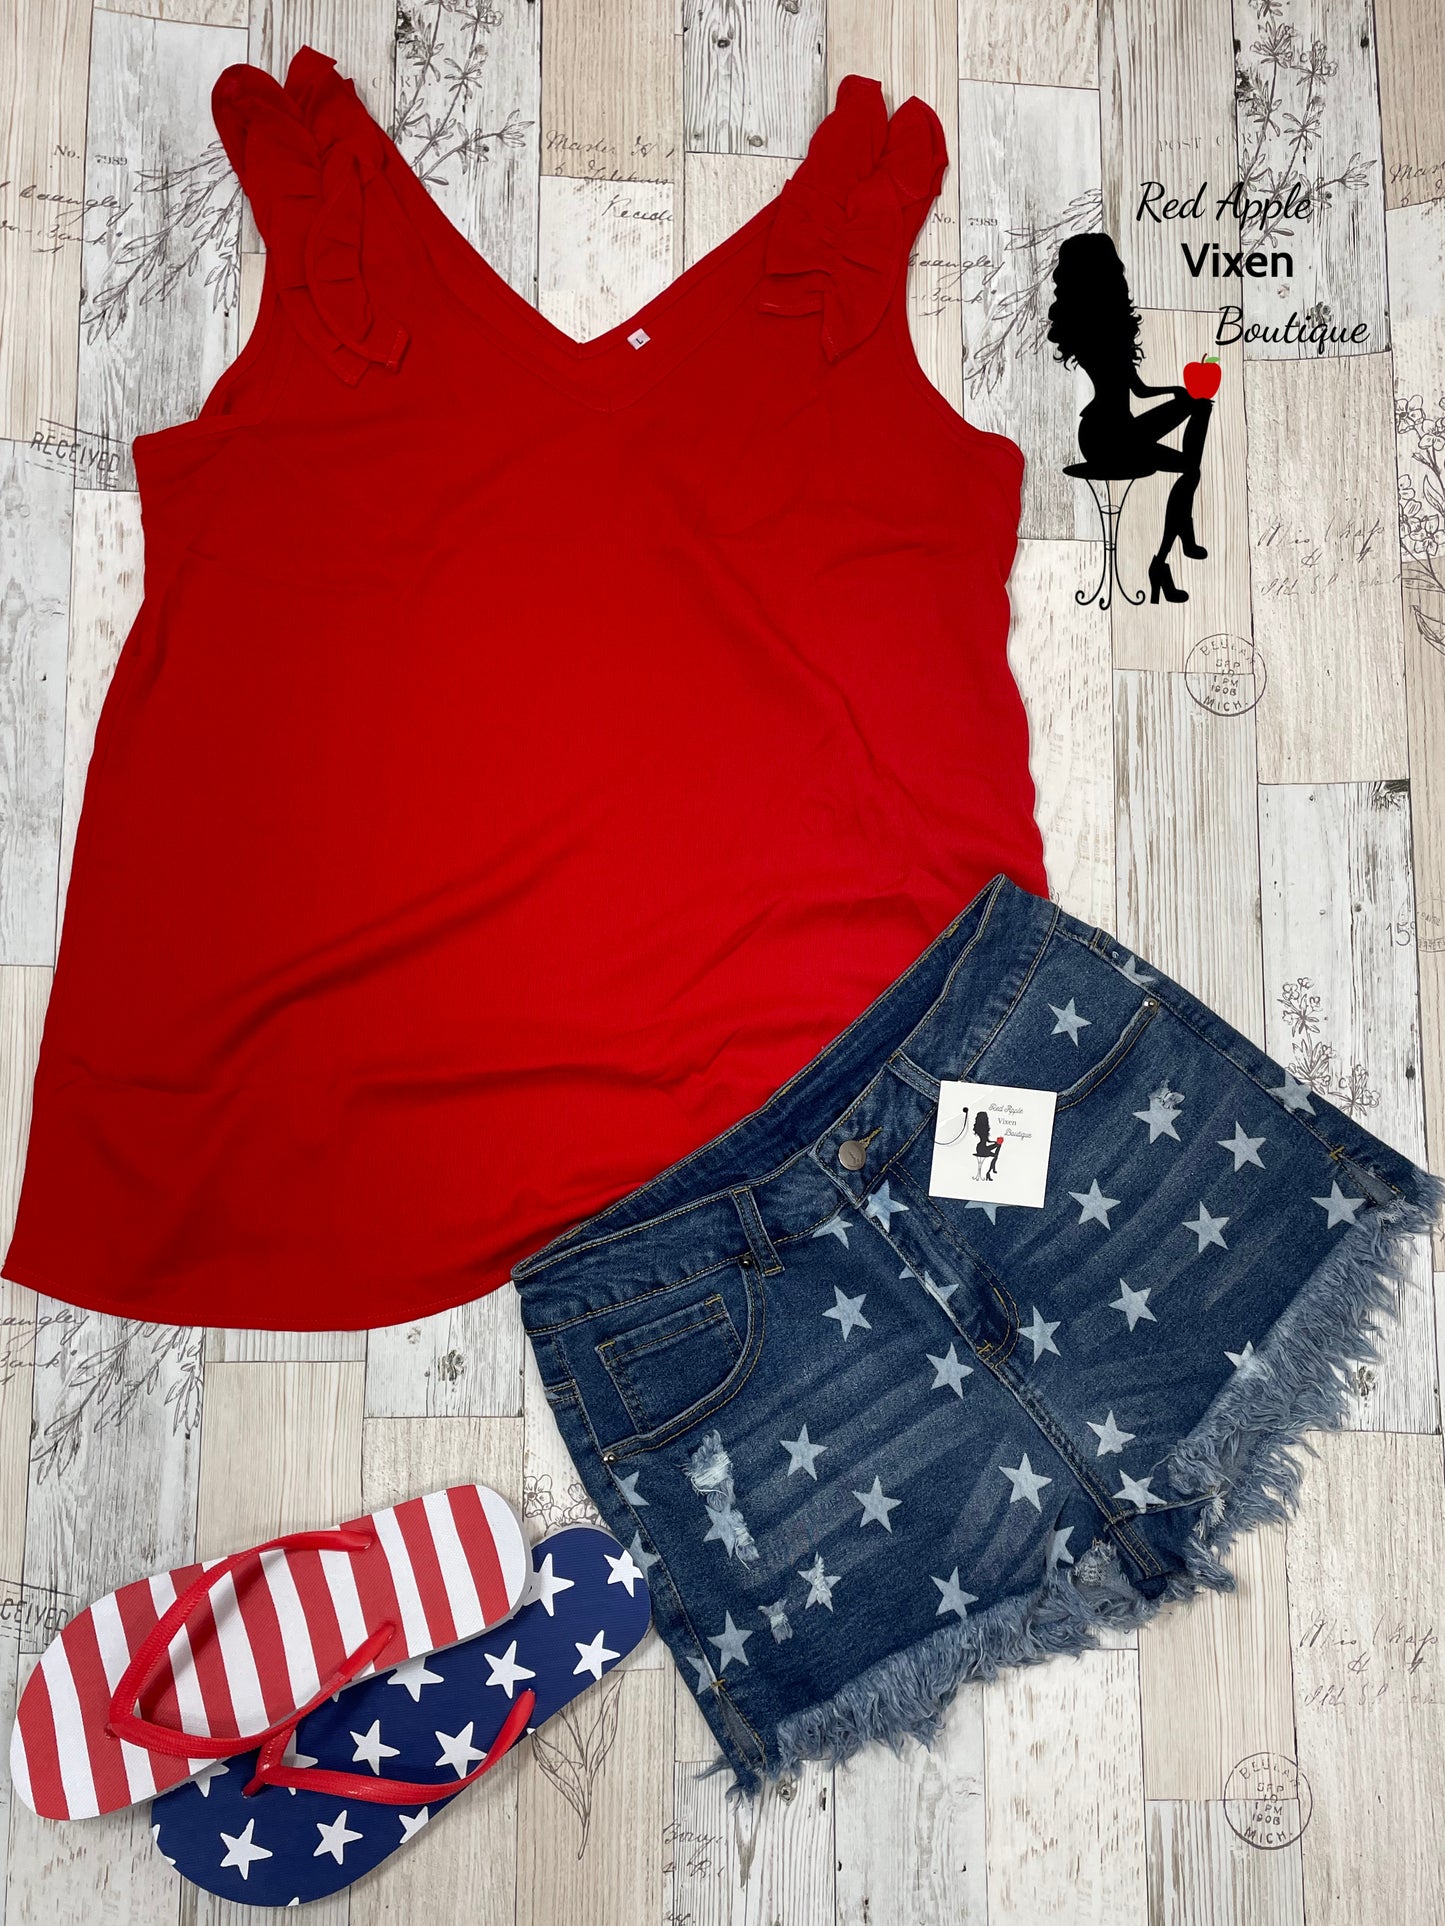 Red Ruffle Tank - Red Apple Vixen Boutique